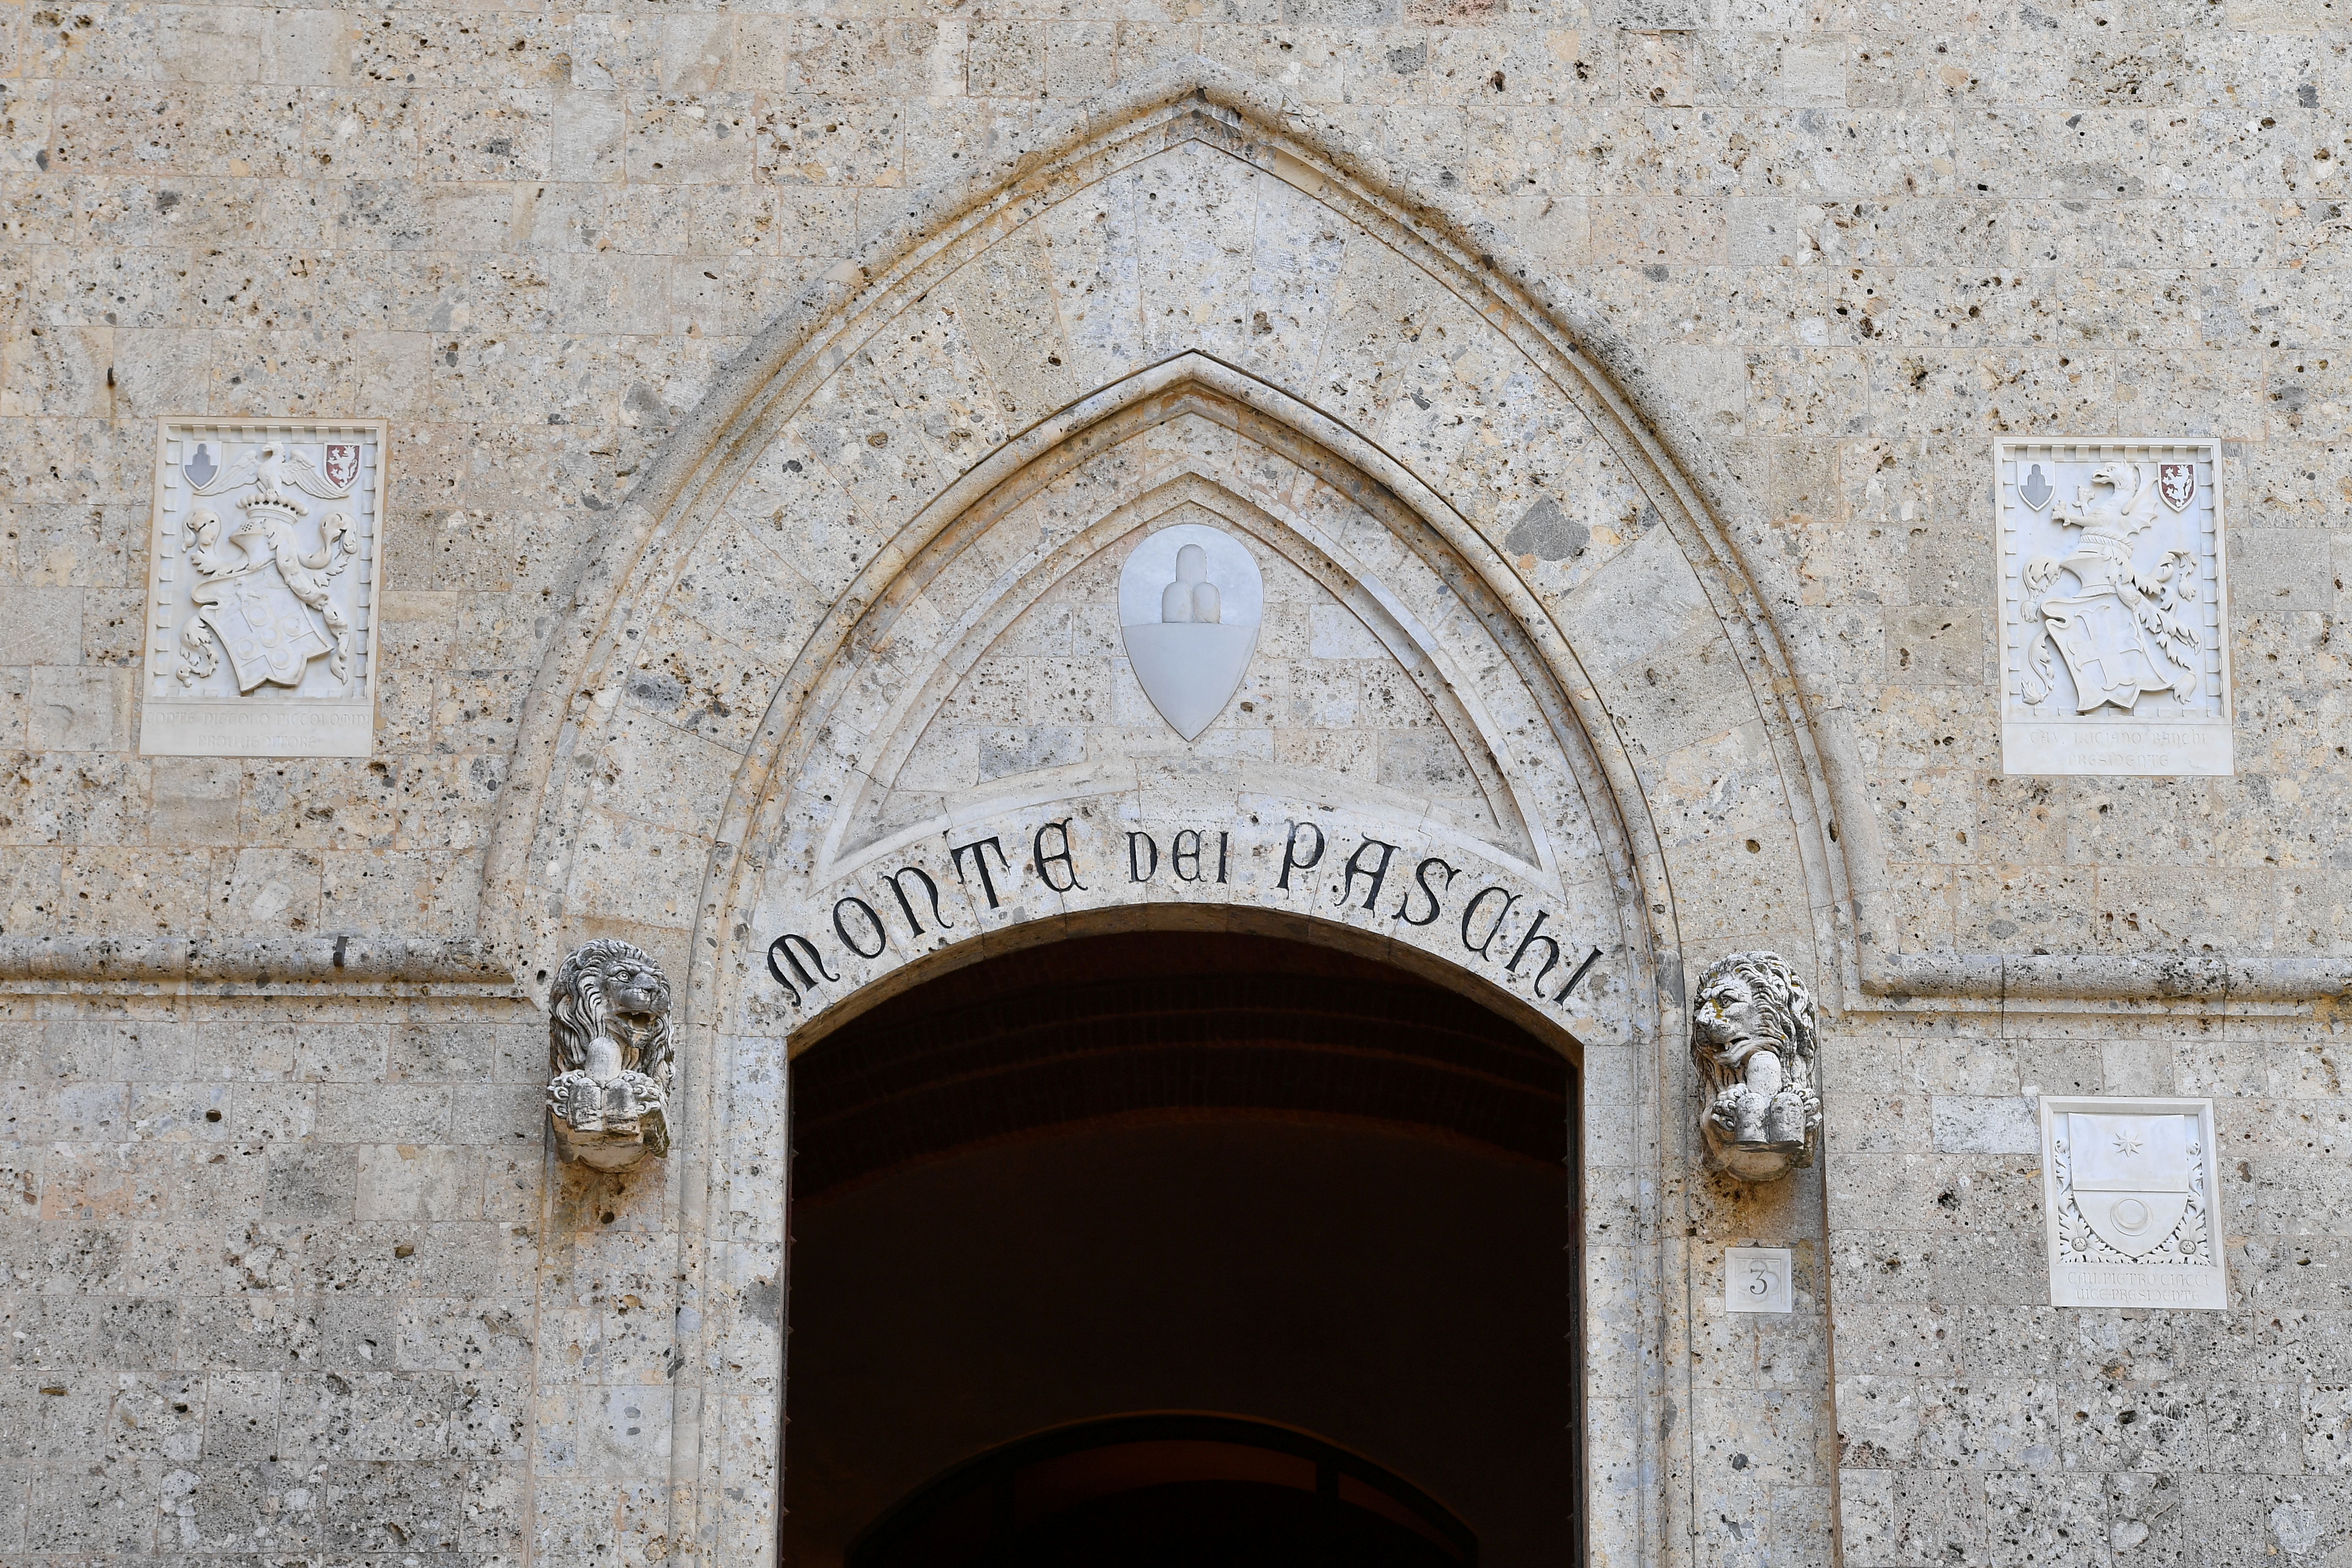 View of the entrance to the headquarters of Monte dei Paschi di Siena (MPS), the oldest bank in the world, which is facing massive layoffs as part of a planned corporate merger, in Siena, Italy, August 11, 2021. REUTERS/Jennifer Lorenzini